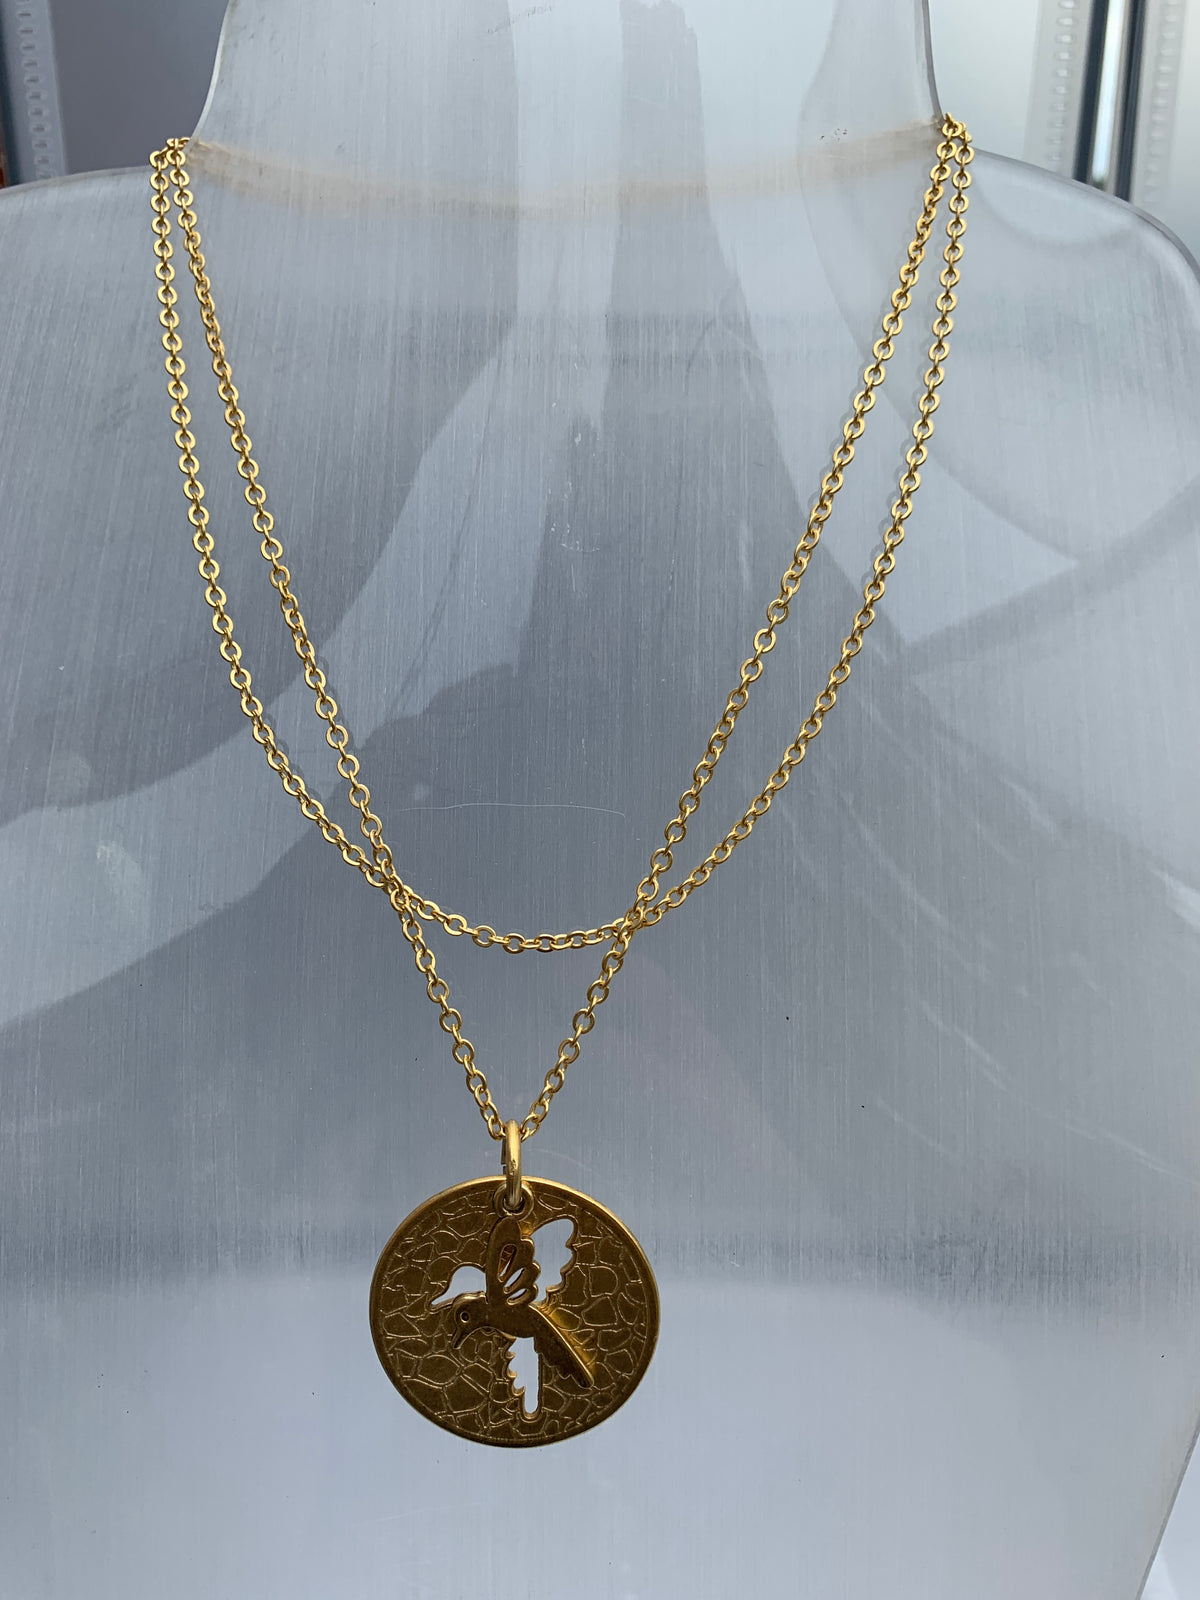 Circular charm with bird cut out on a double chain